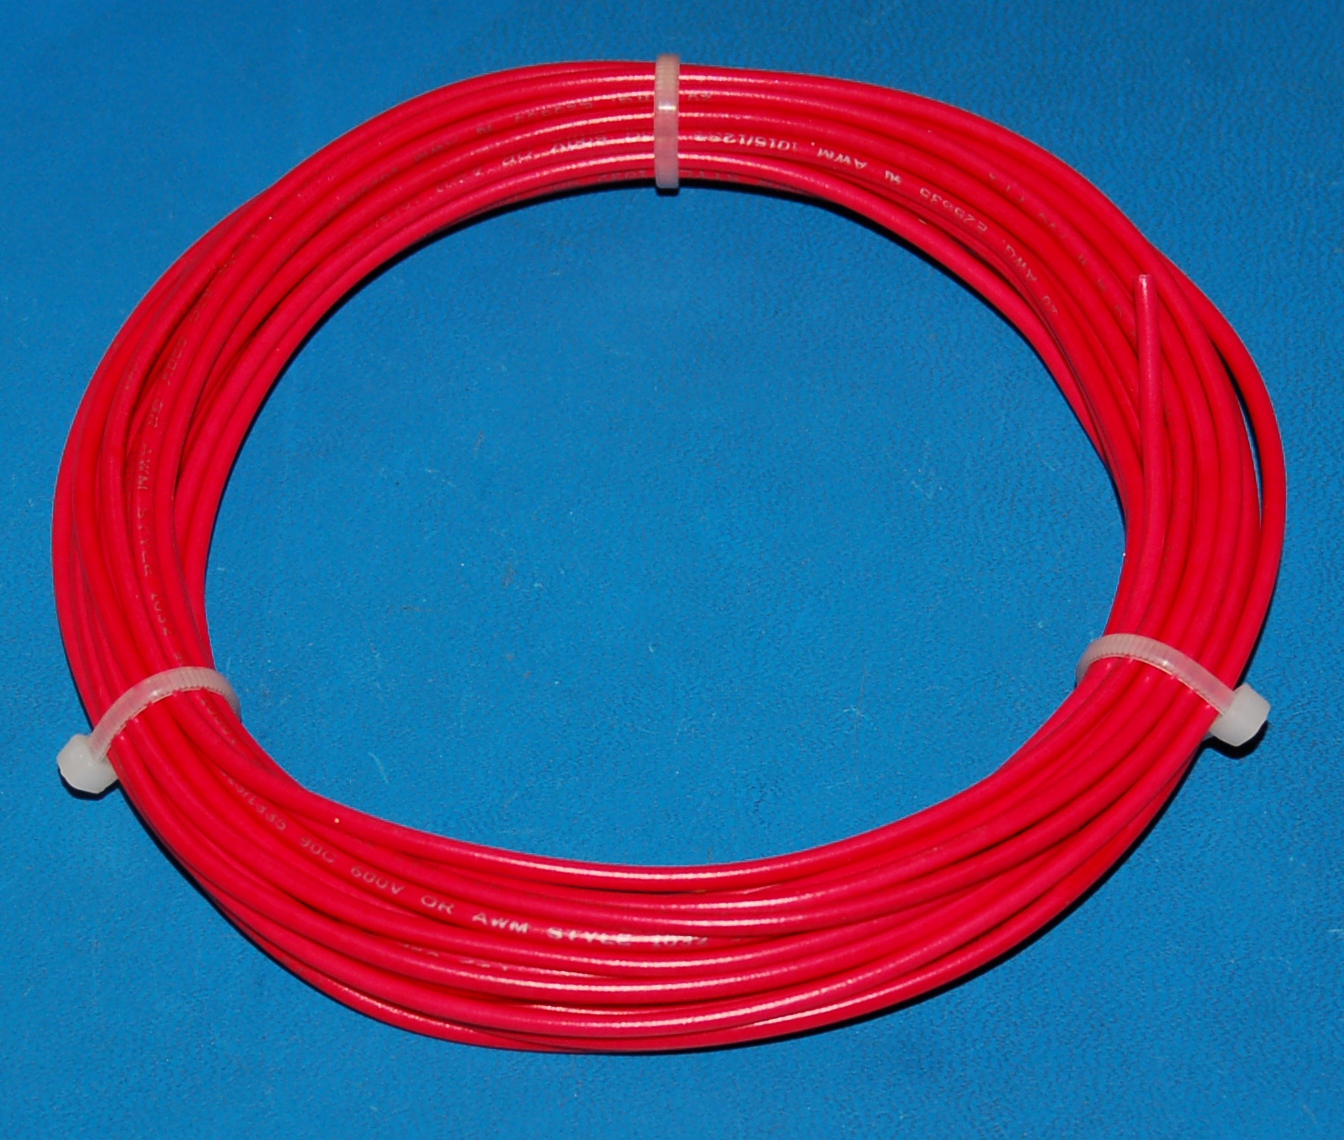 Solid Tinned Copper Wire, 600V, #20 AWG x 25' (Red)